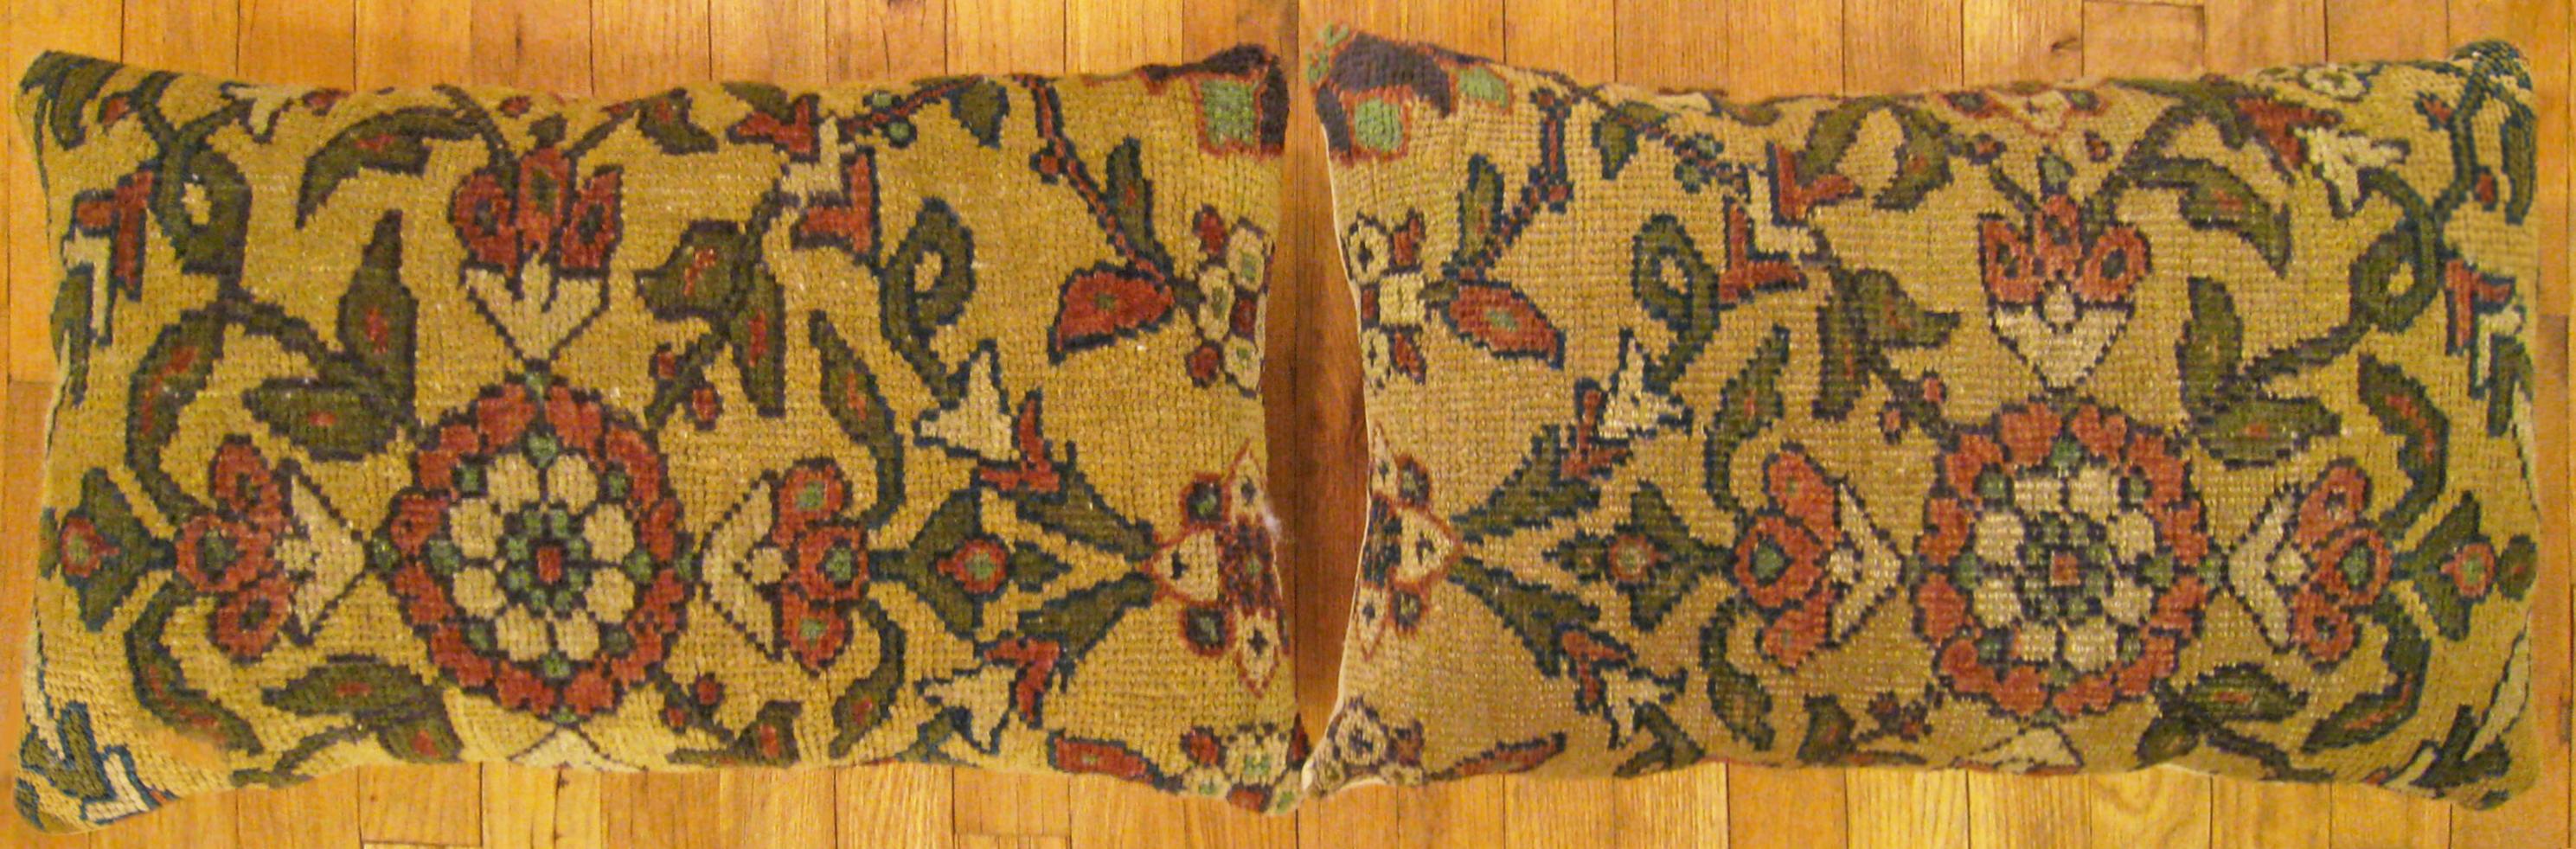 A Pair of Antique Persian Sultanabad carpet pillows ; size 2'0” x 1'3” Each.

An antique decorative pillows with floral elements allover a cream central field, size 2'0” x 1'3” each. This lovely decorative pillow features an antique fabric of a